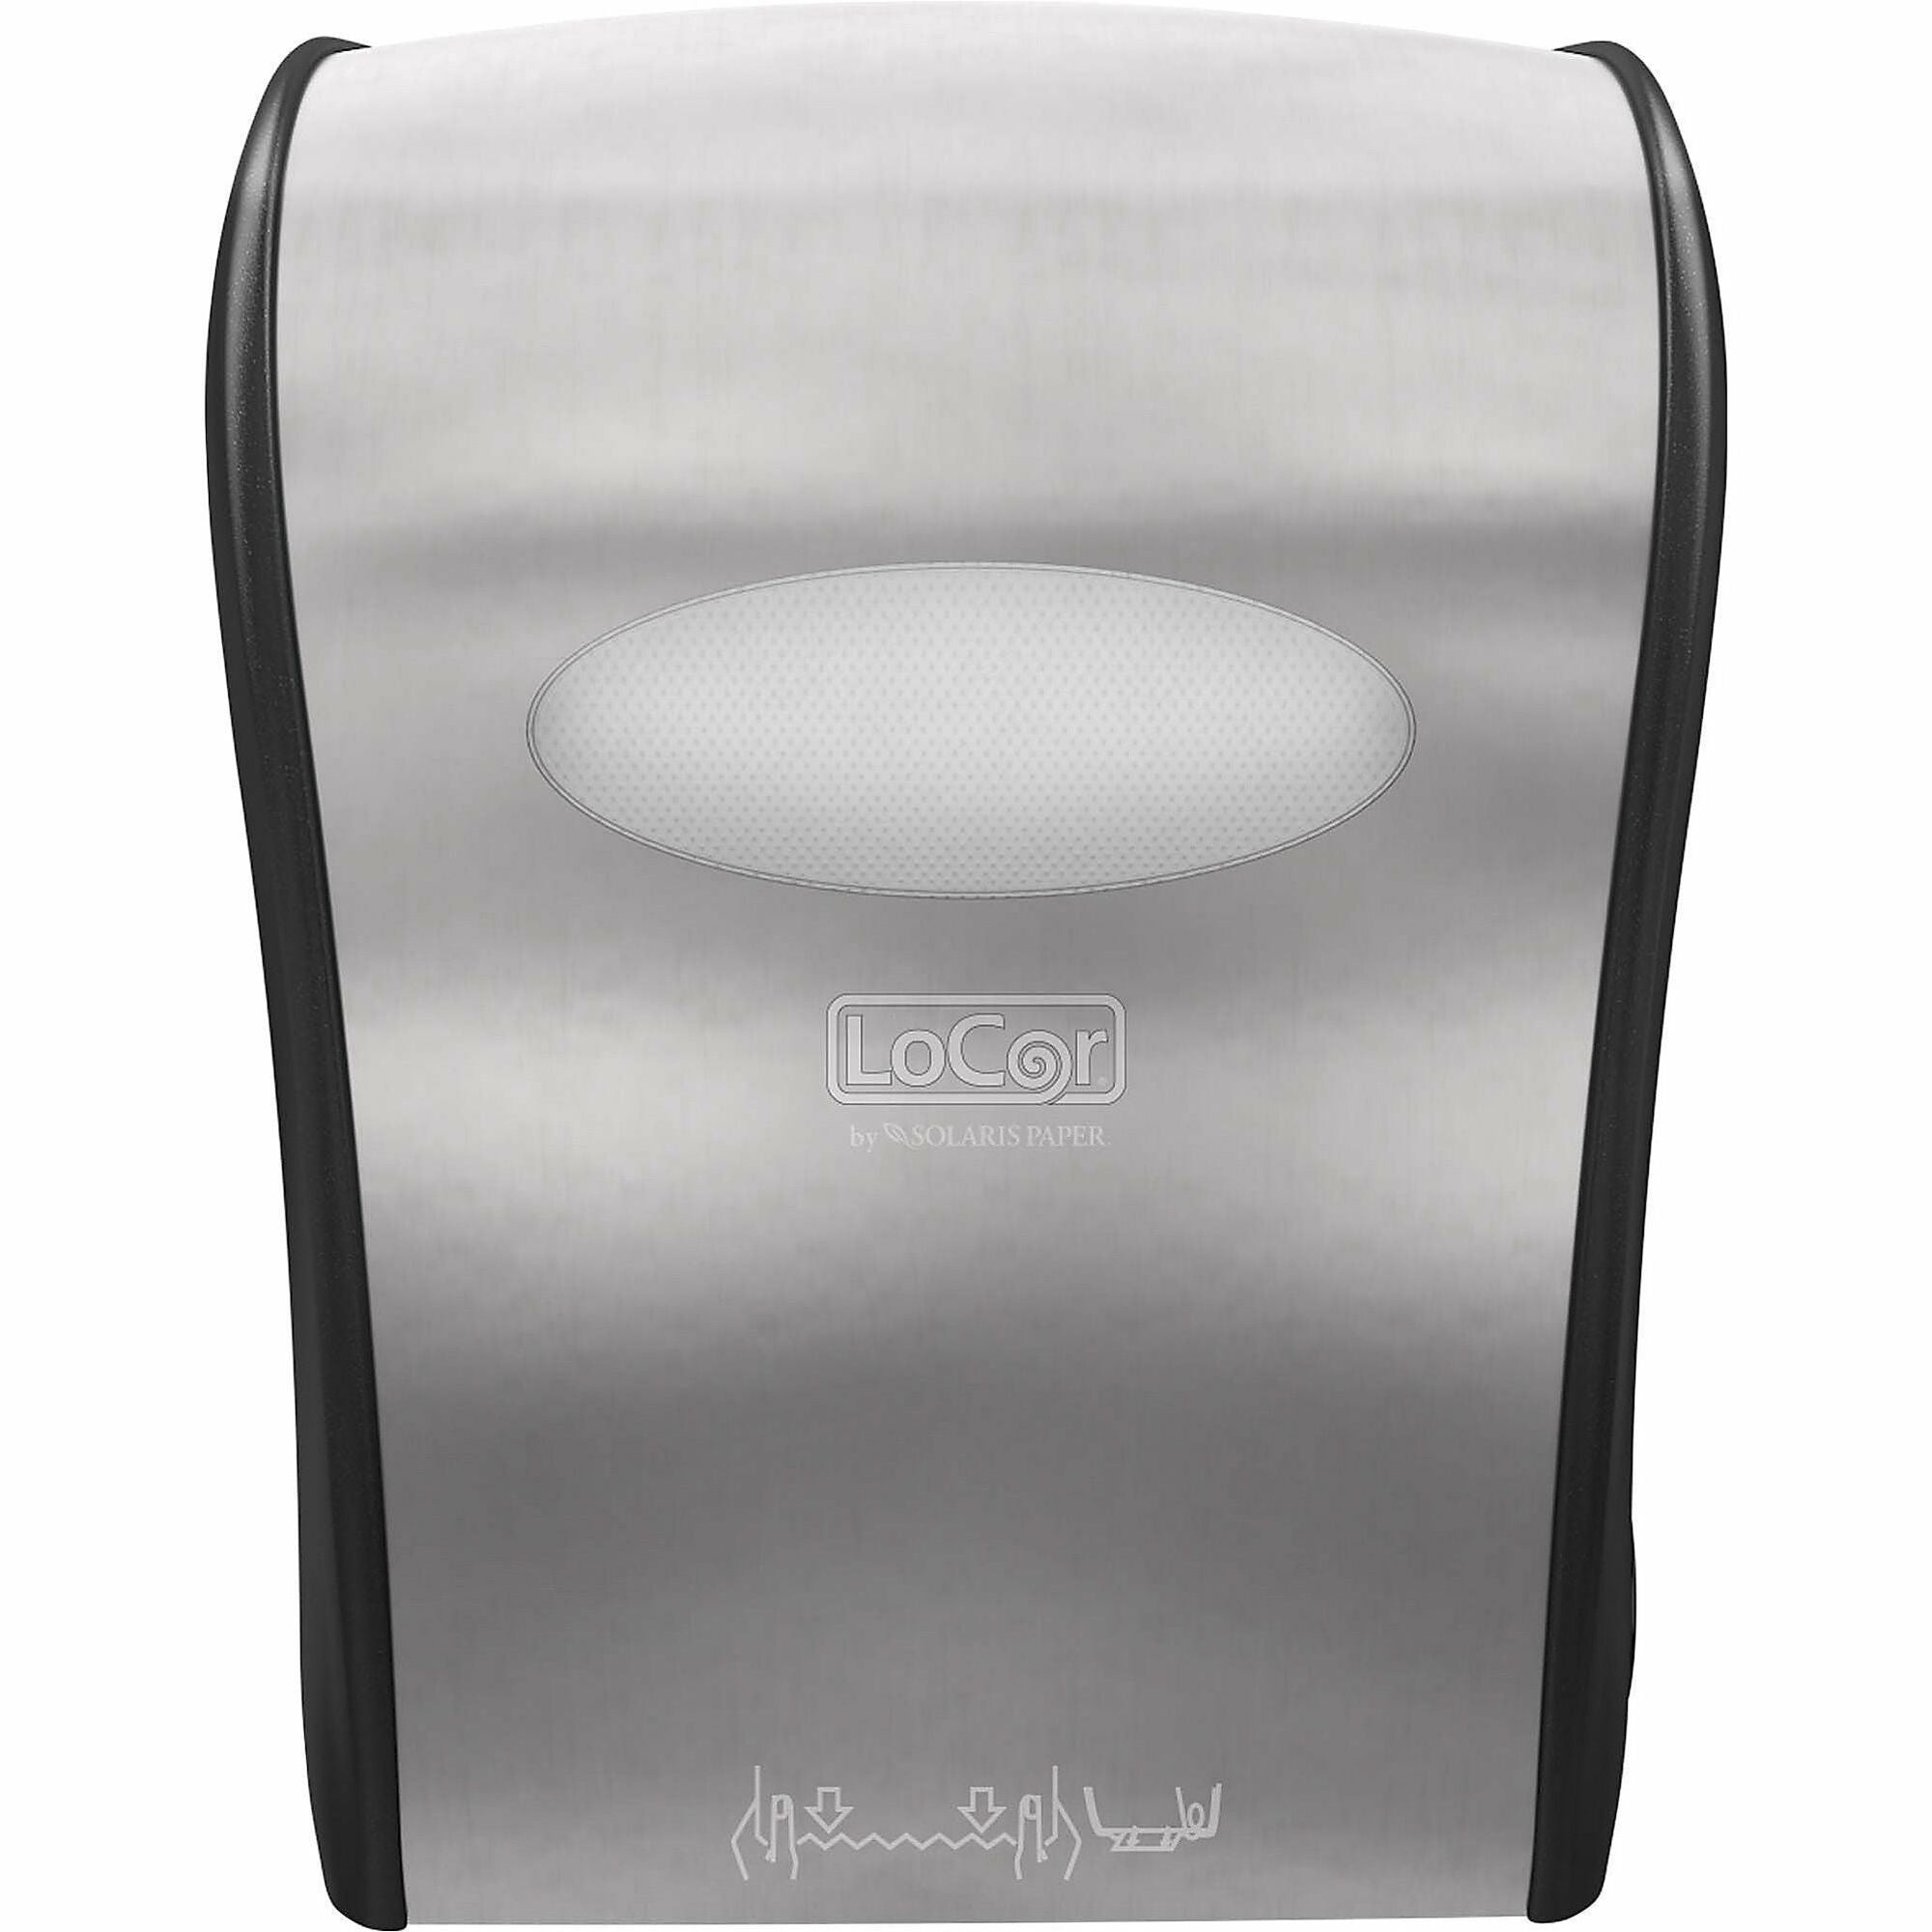 LoCor Wall-Mount Mechanical Paper Towel Dispenser, Stainless - 12.4" Height x 16.8" Width x 10" Depth - Plastic - Stainless - Wall Mountable, Impact Resistant, Bump Resistant - 1 Each